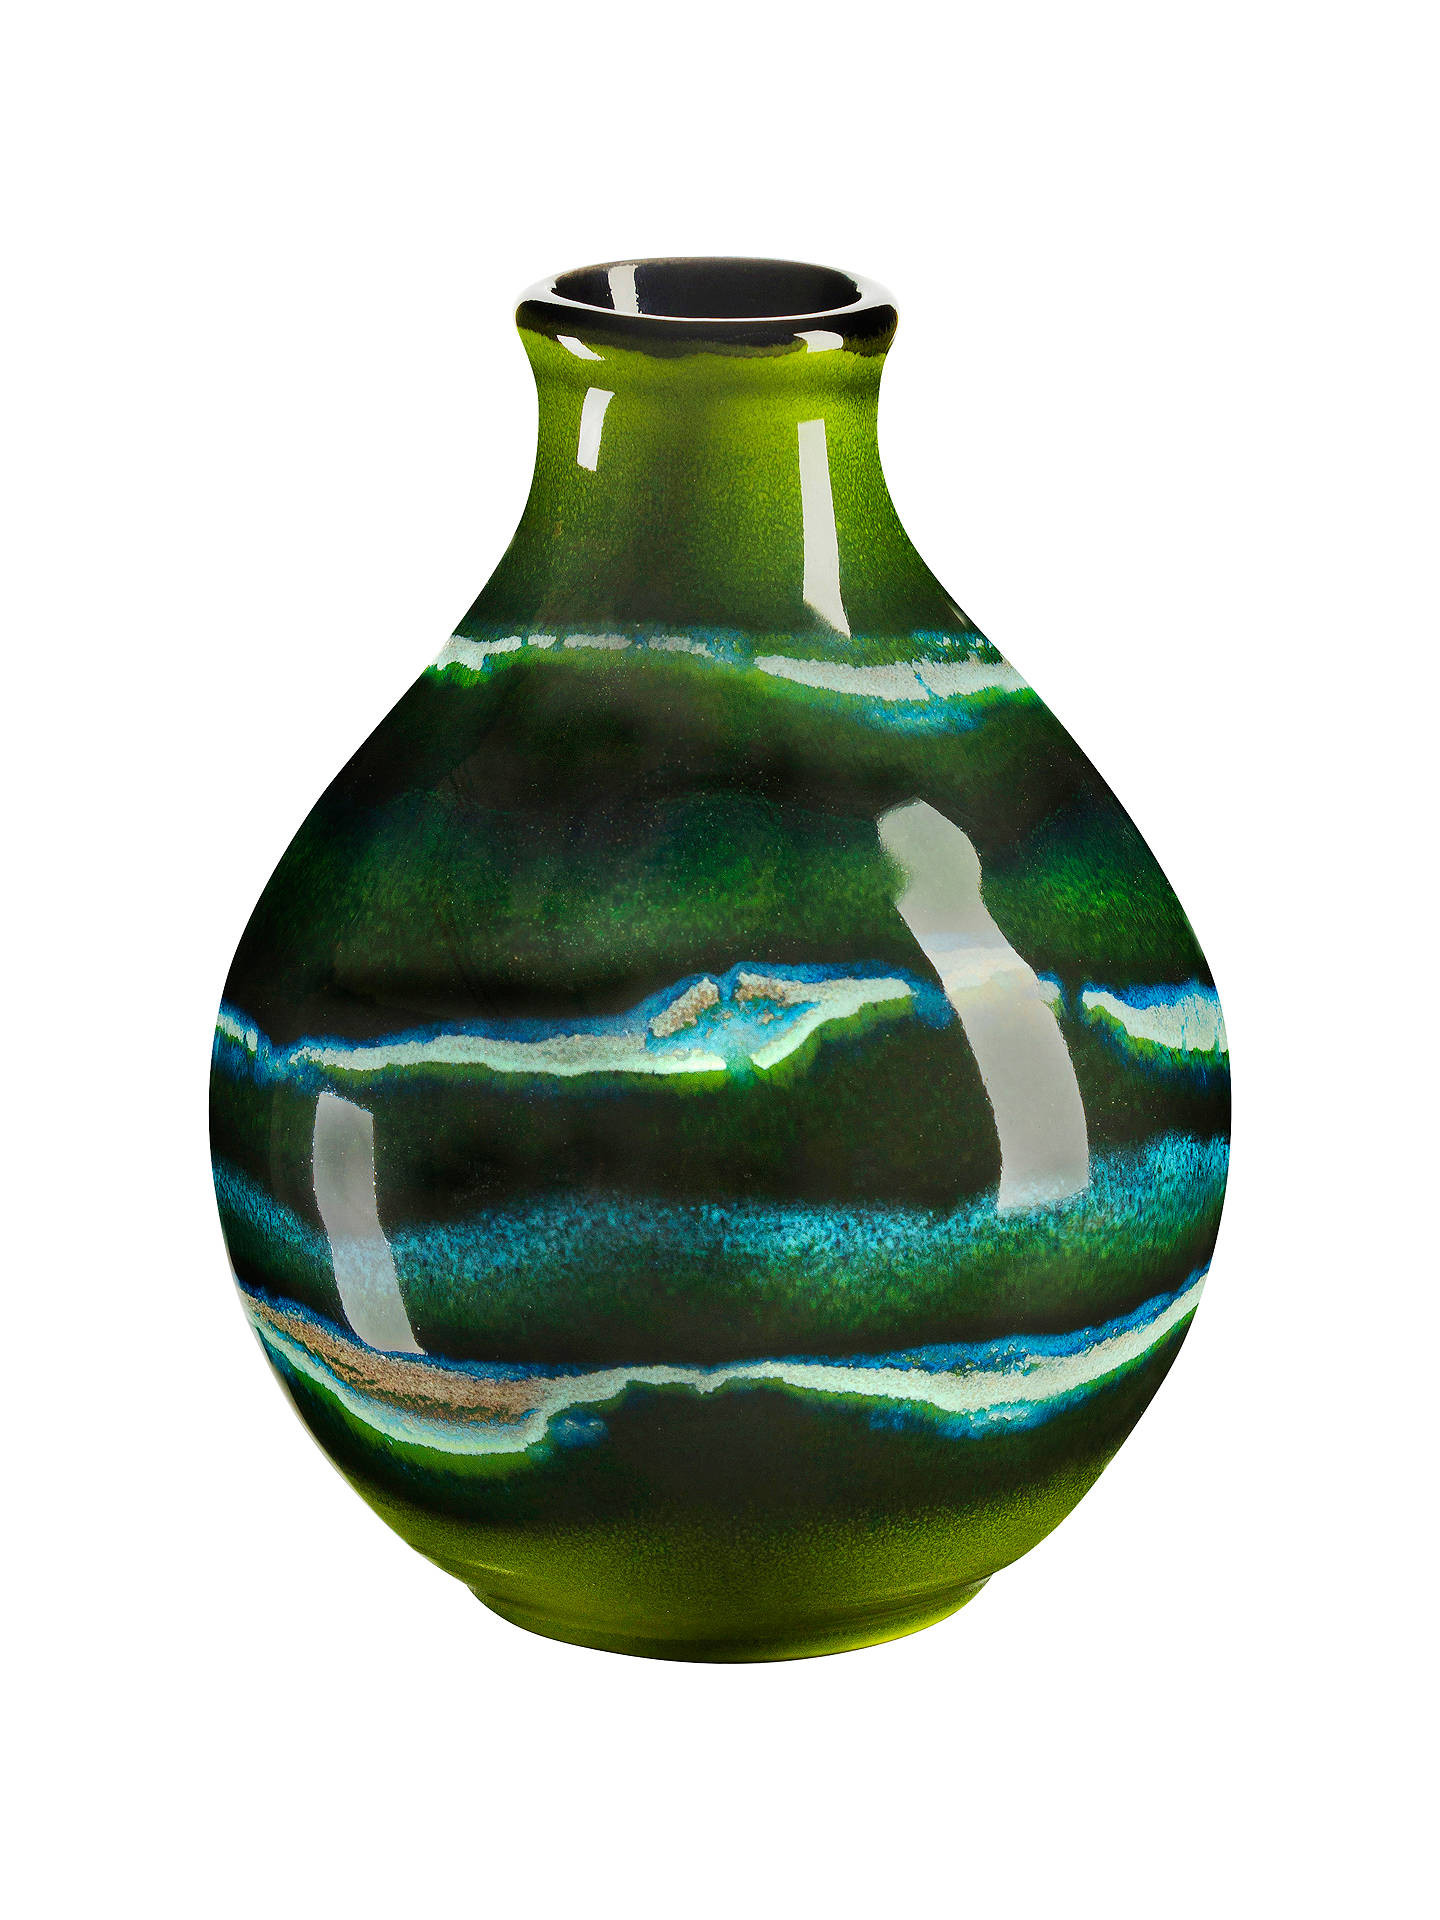 21 Best Ceramic Bud Vase 2024 free download ceramic bud vase of bud vases small glass vases with strong suction cups for t for buypoole pottery maya bud vase h12cm online at johnlewis com